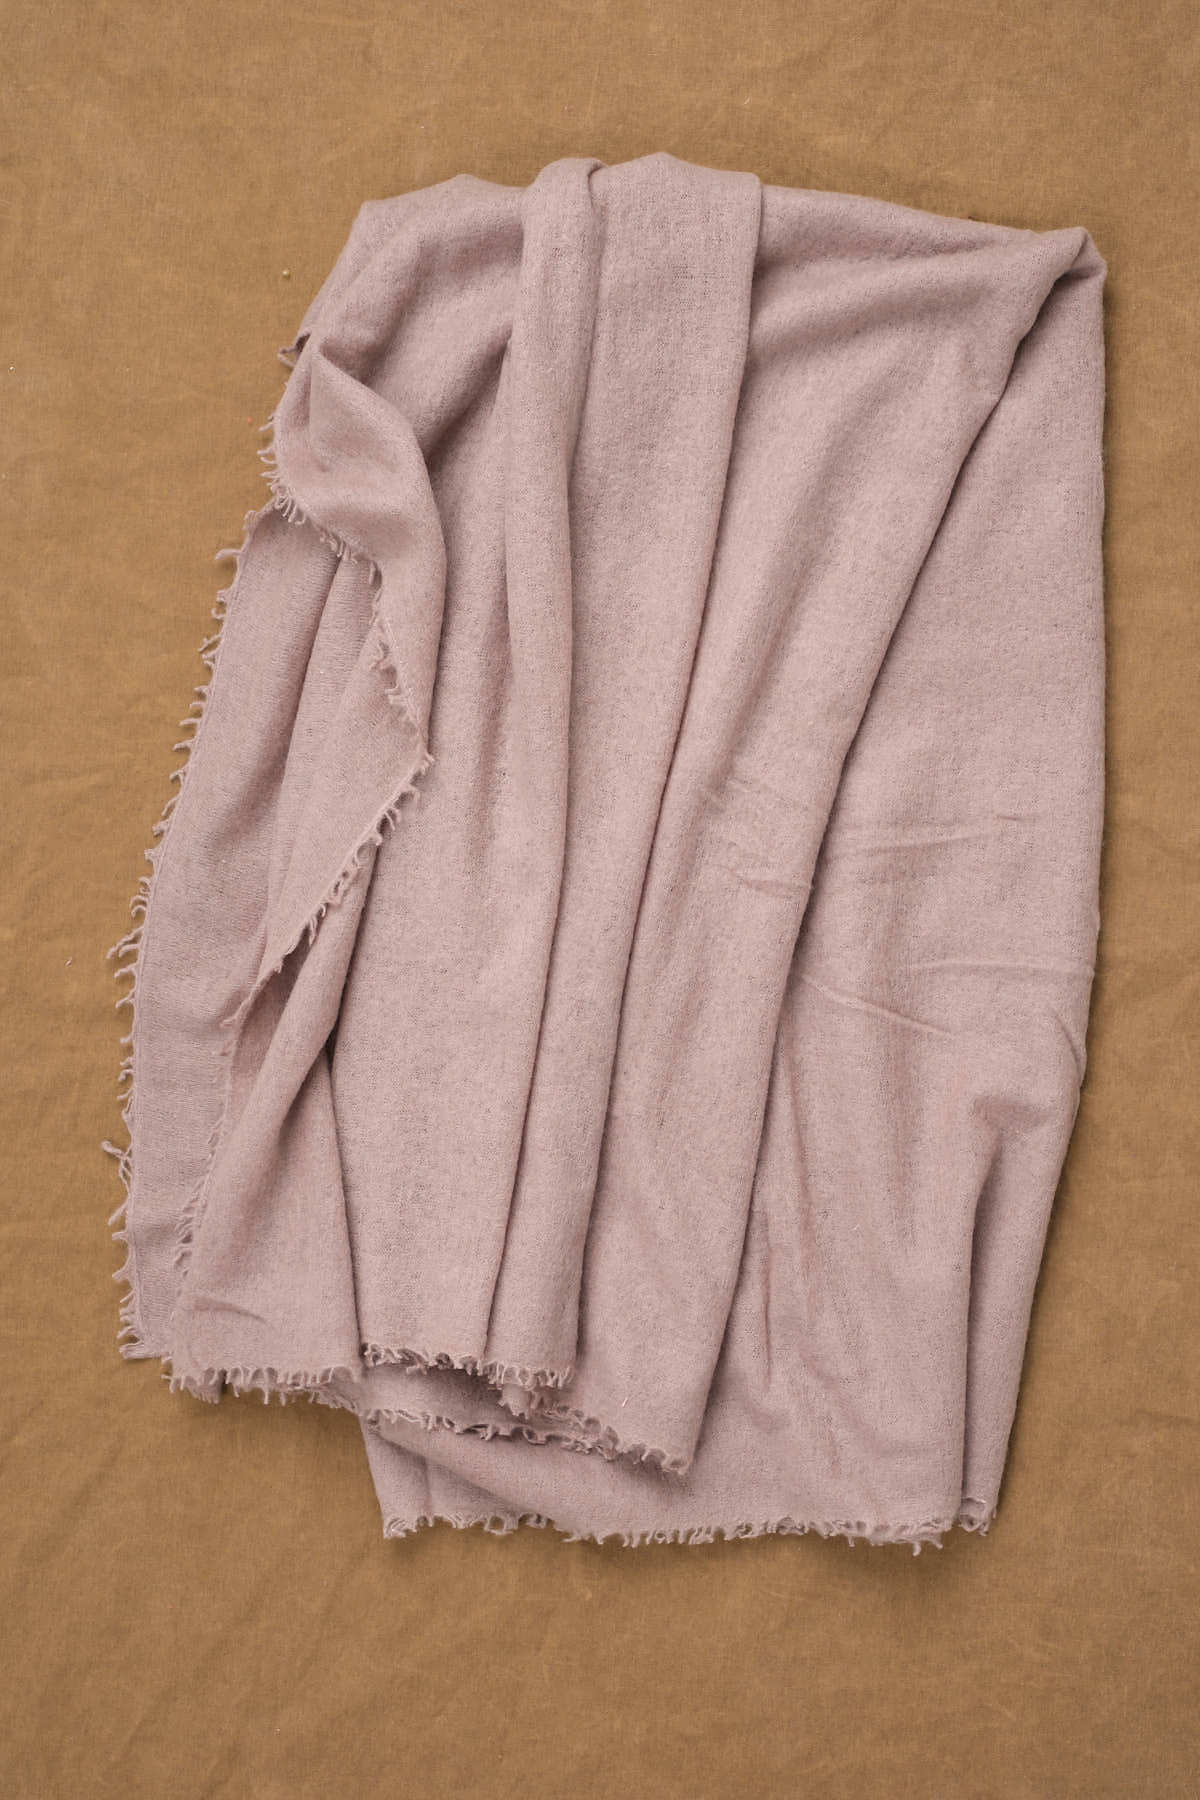 Ruffled Cashmere Fringed Throw in Ecorce